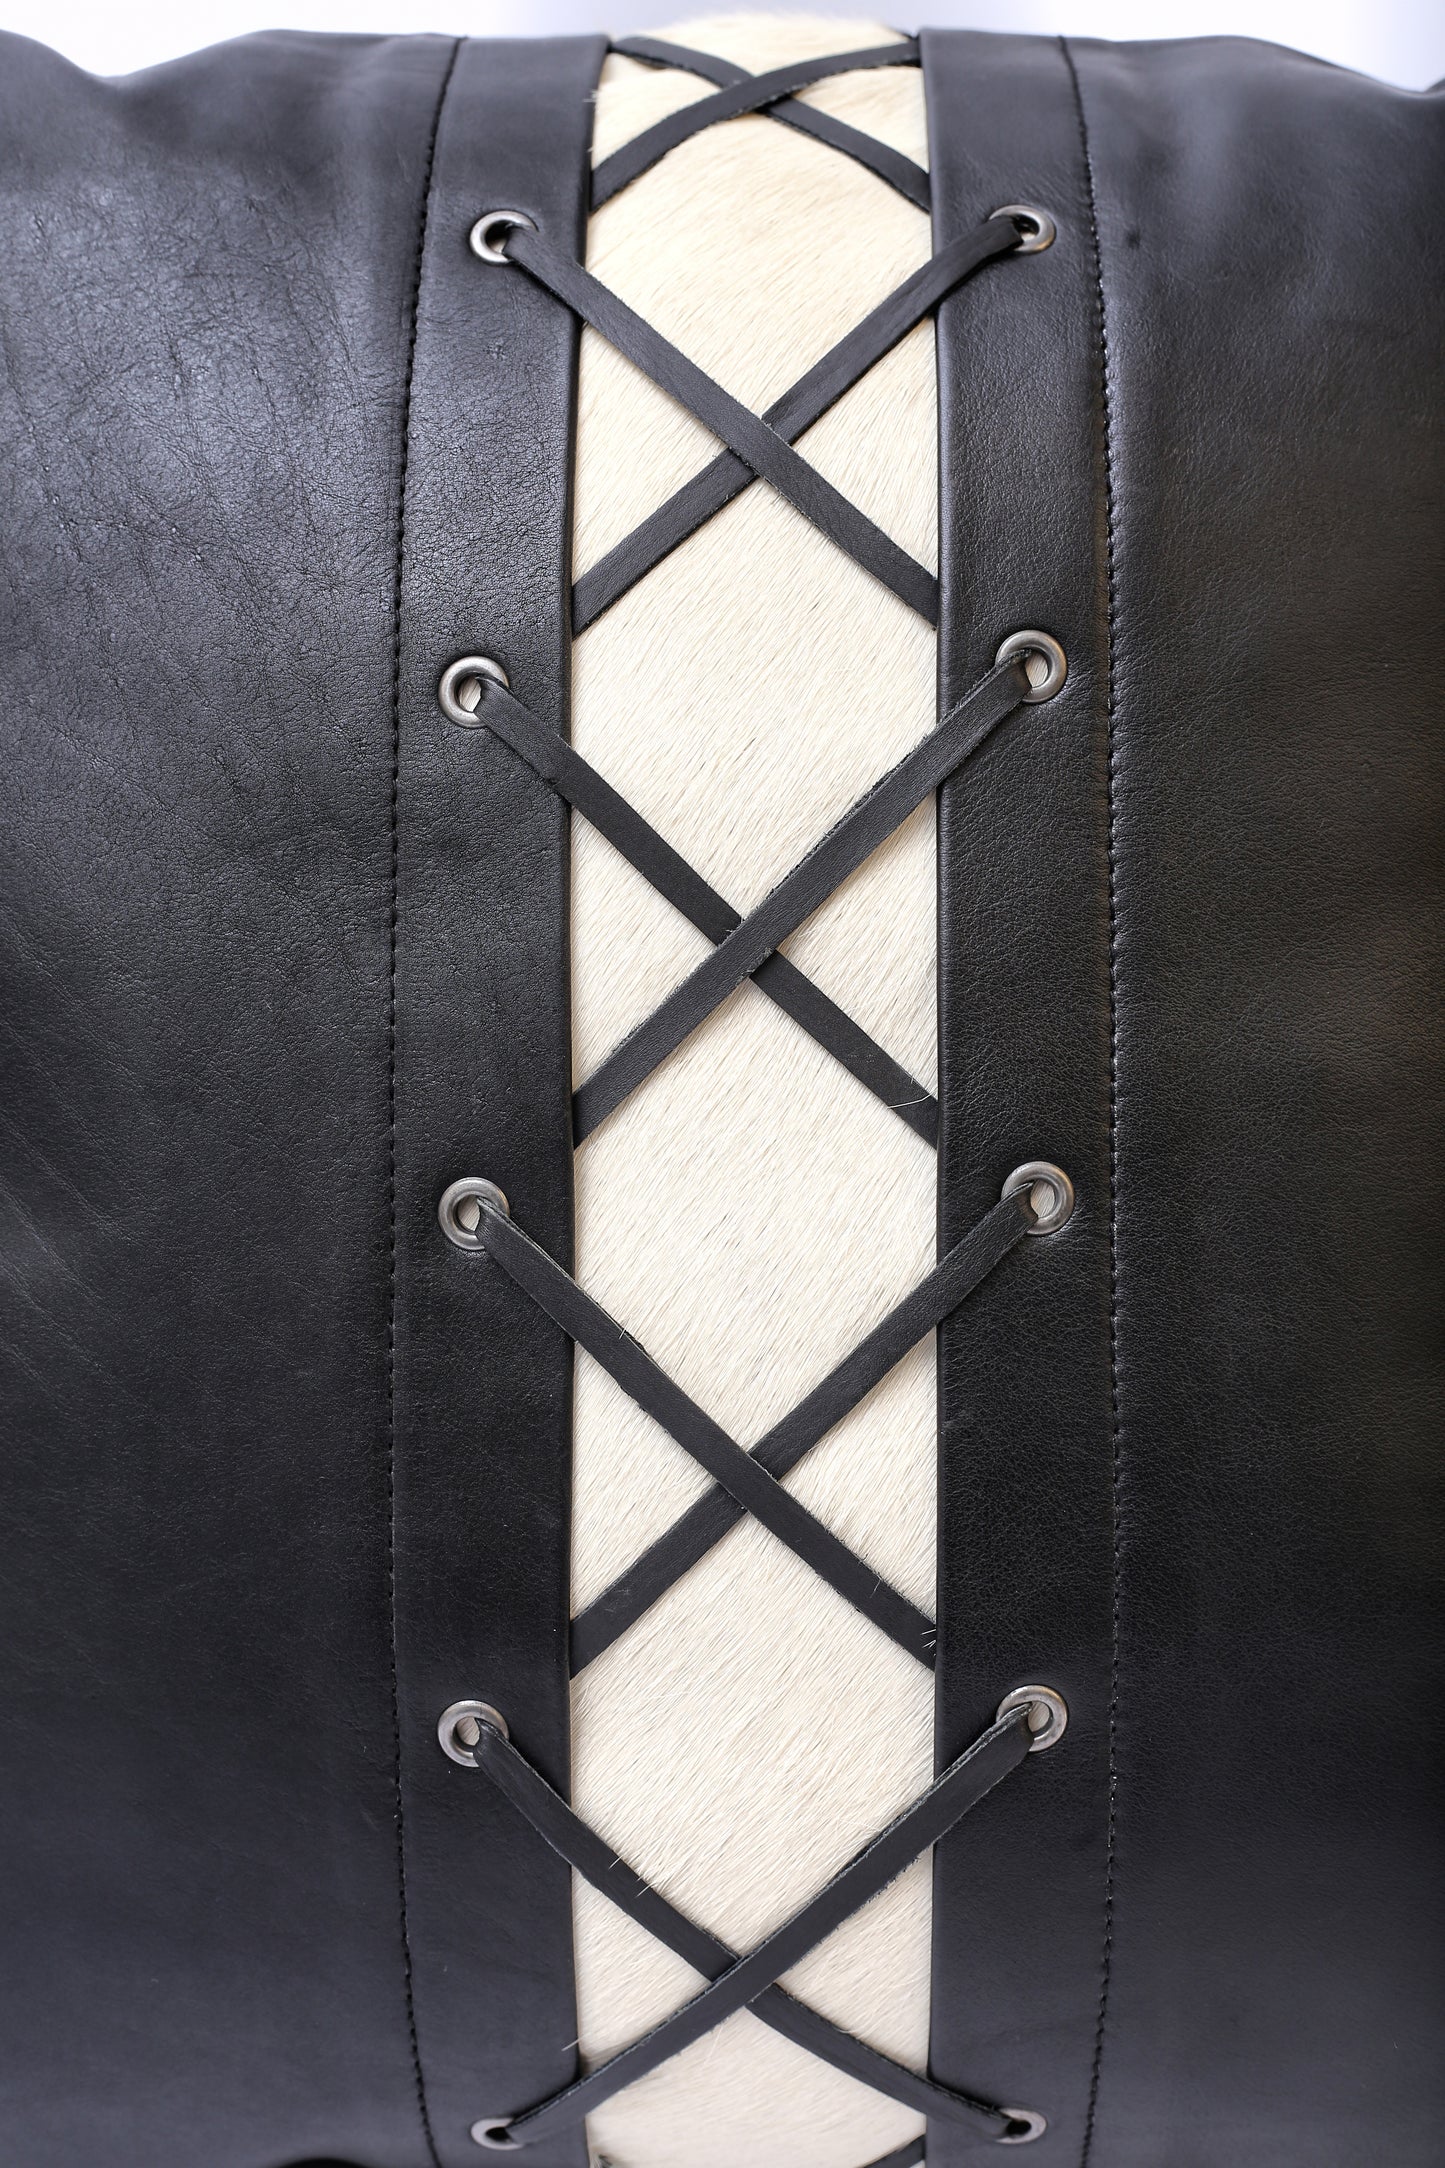 The Black & White Beauty in Cow Leather